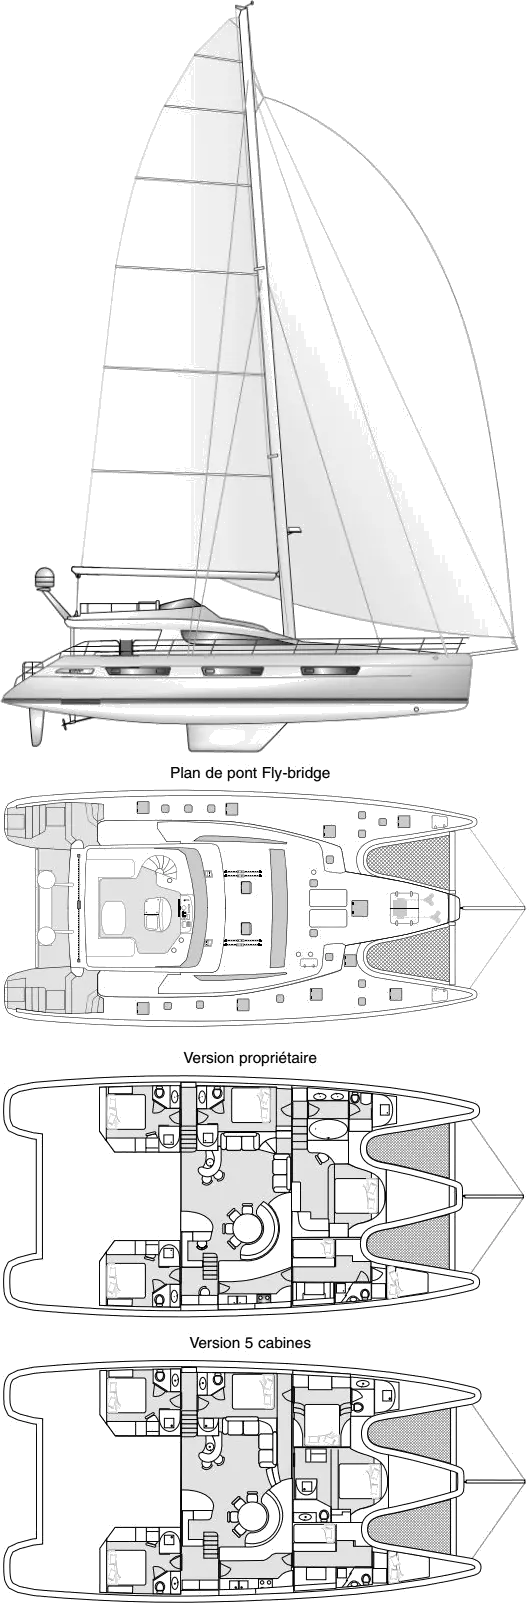 Drawing of Privilege 745